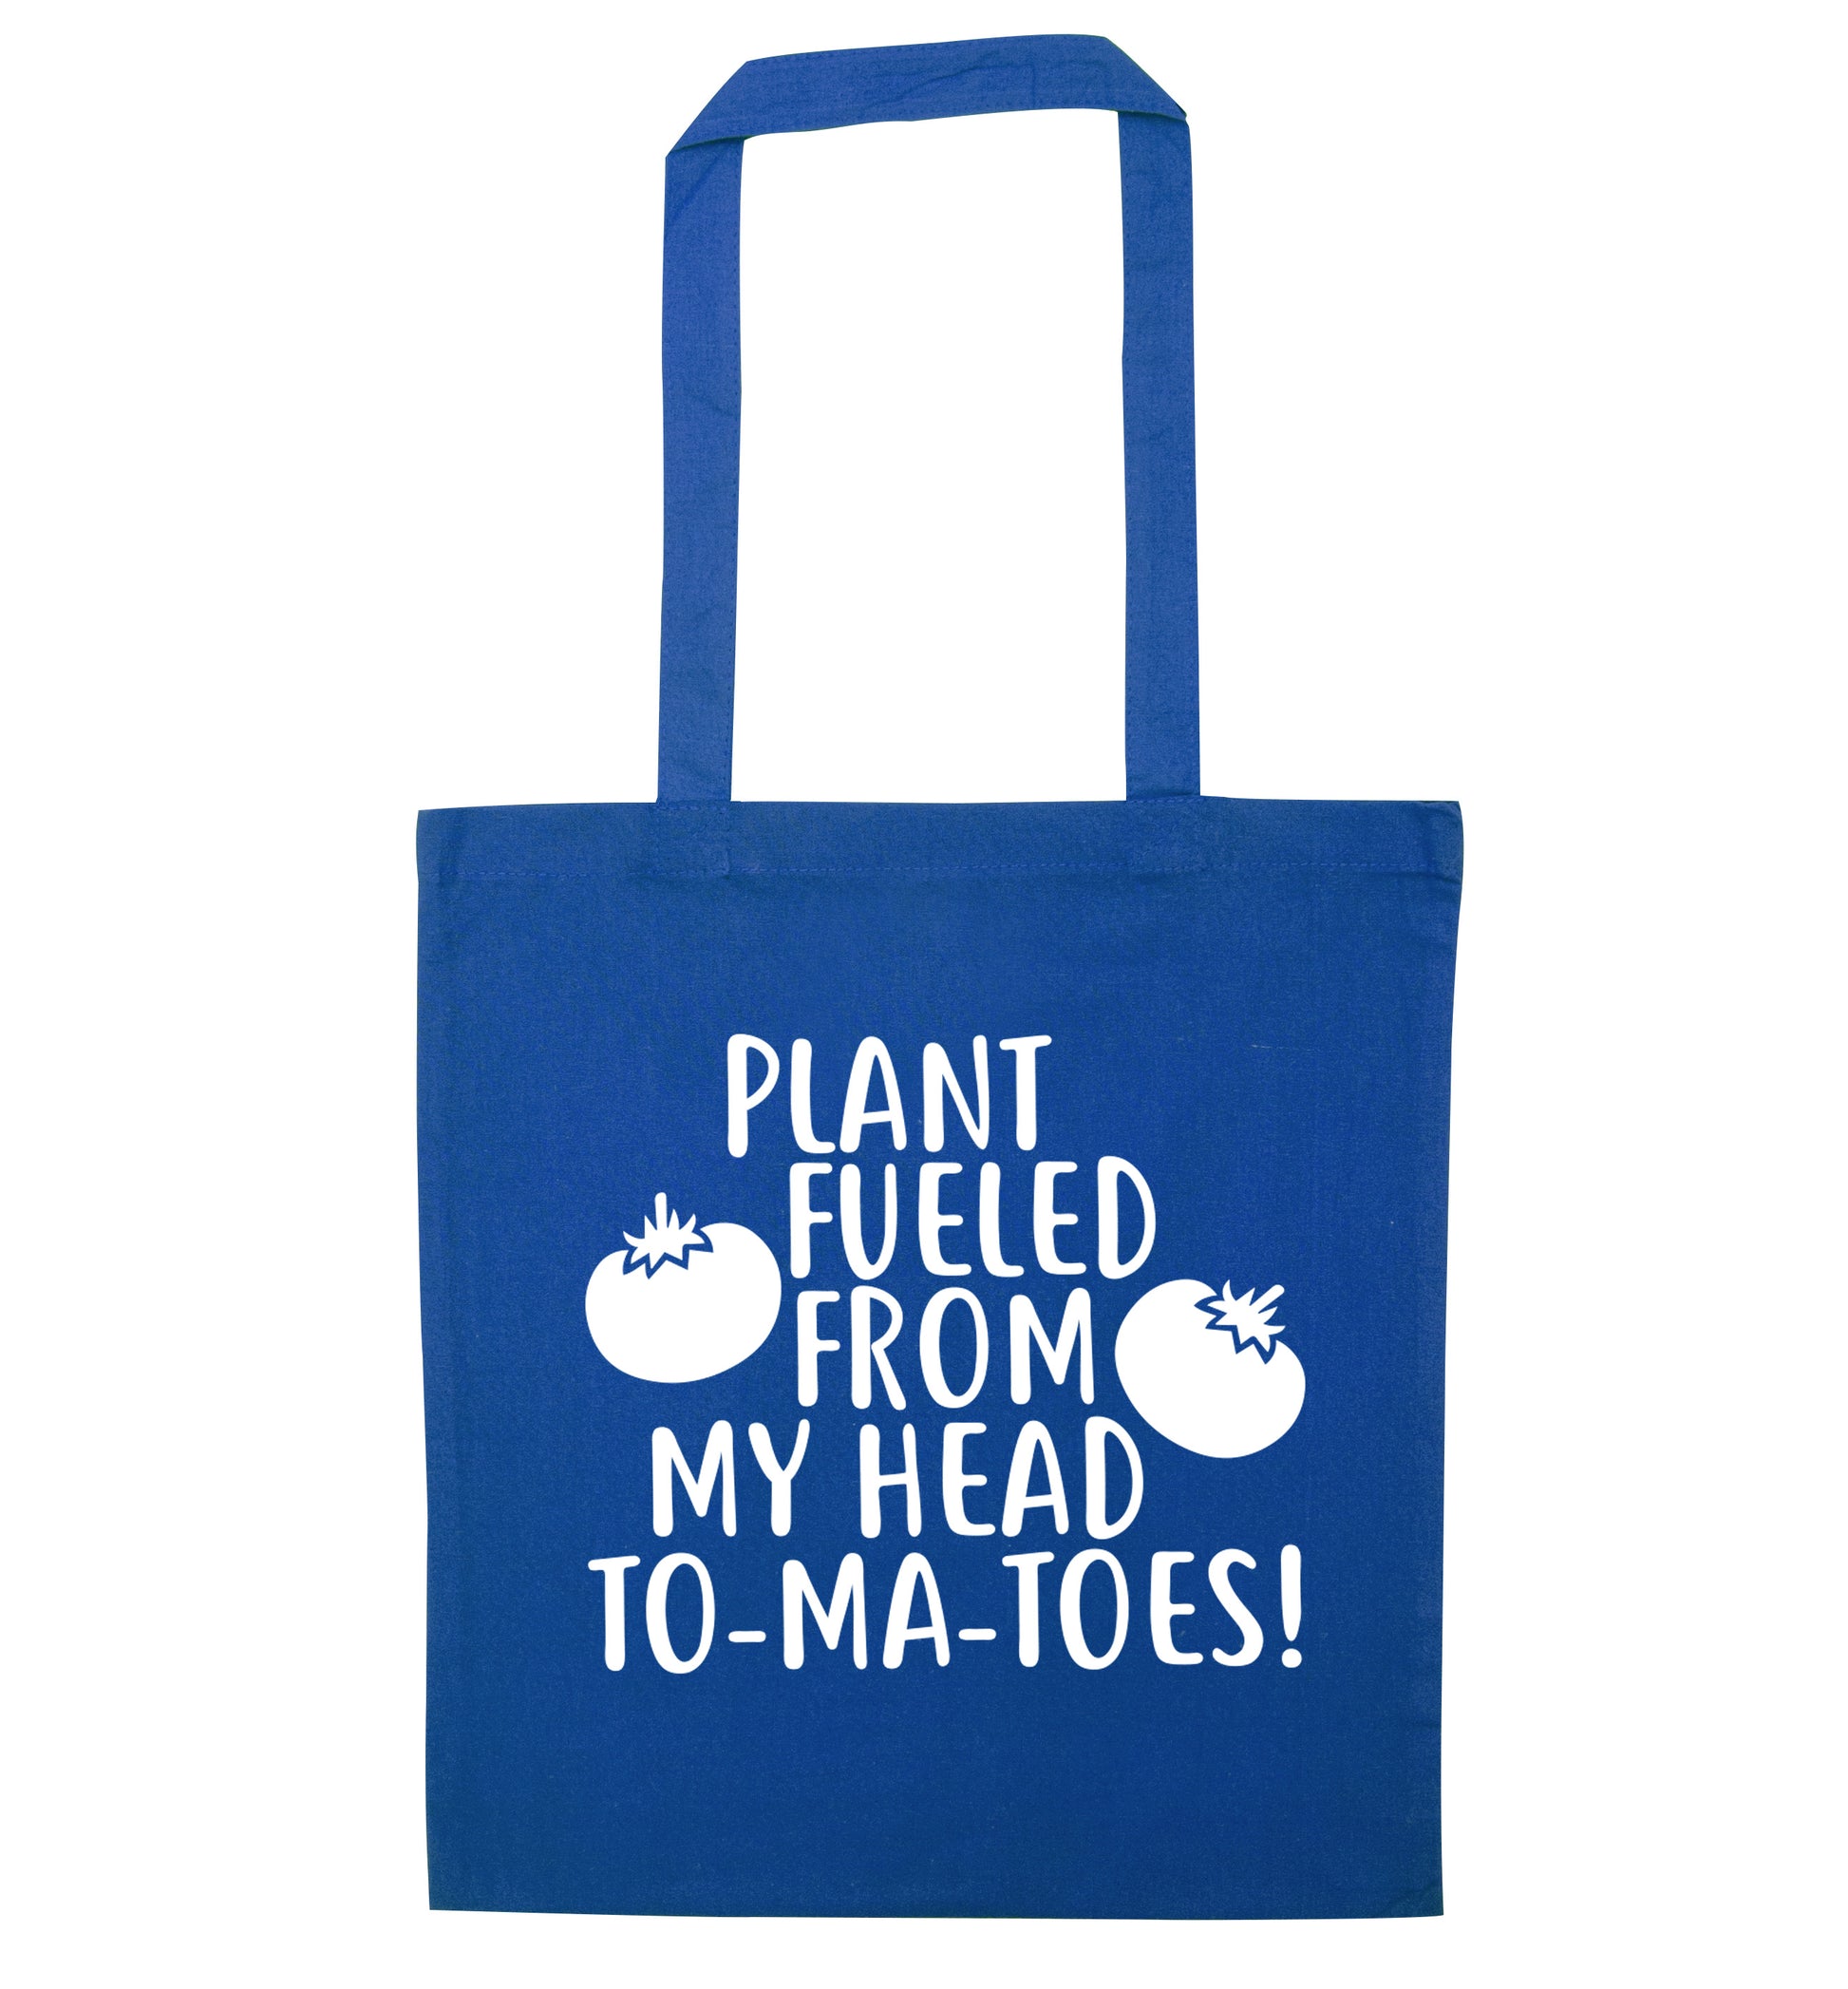 Plant fueled from my head to-ma-toes blue tote bag